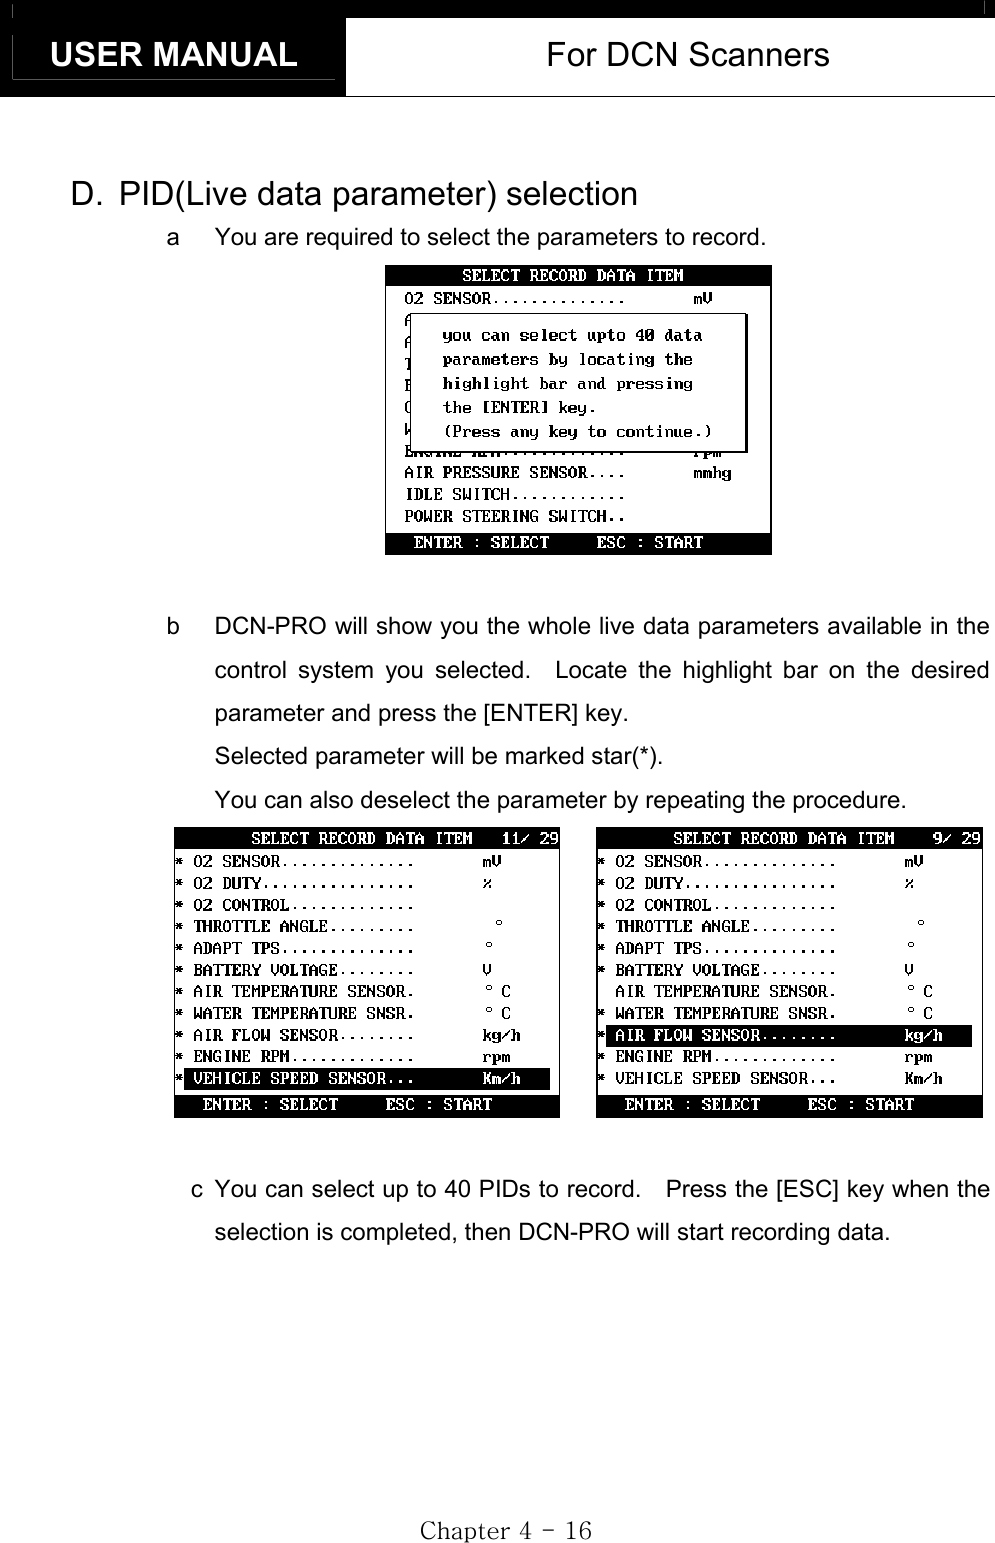 USER MANUAL  For DCN Scanners GjG[GTGX]GD.  PID(Live data parameter) selection a  You are required to select the parameters to record. b  DCN-PRO will show you the whole live data parameters available in the control system you selected.  Locate the highlight bar on the desired parameter and press the [ENTER] key. Selected parameter will be marked star(*). You can also deselect the parameter by repeating the procedure.    c  You can select up to 40 PIDs to record.    Press the [ESC] key when the selection is completed, then DCN-PRO will start recording data. 